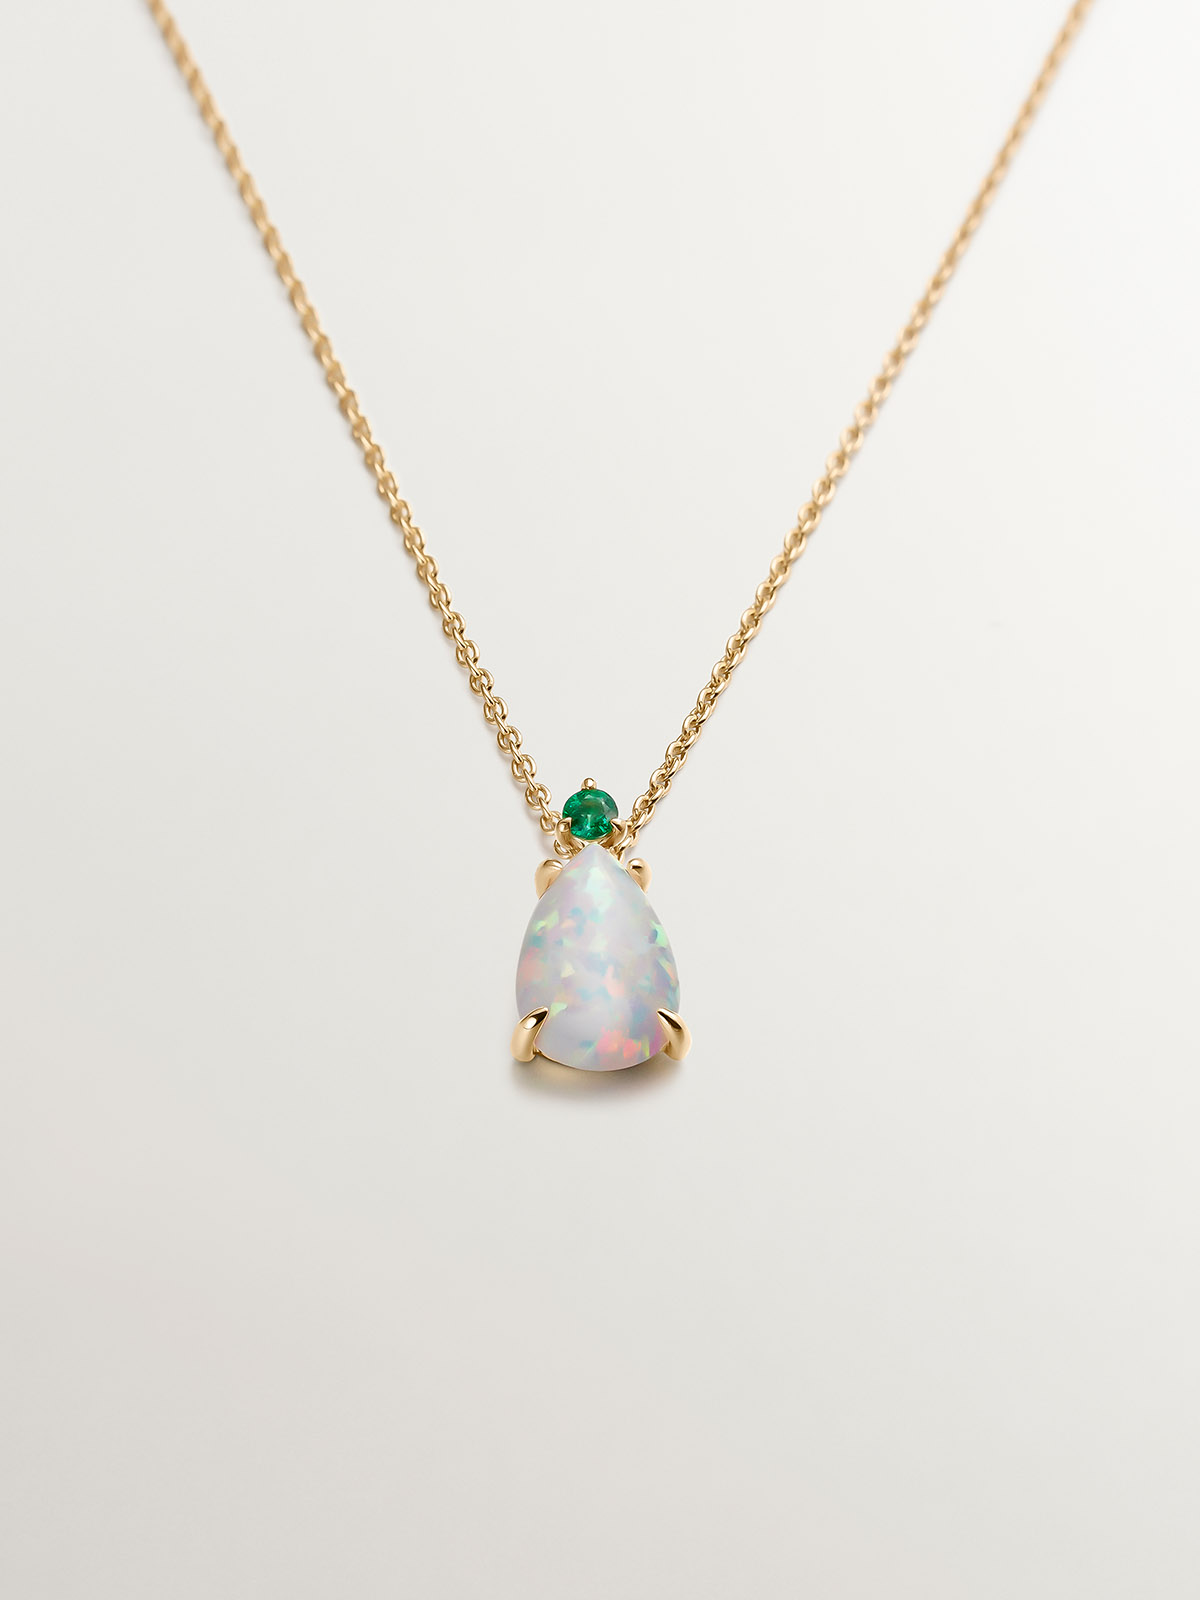 18K yellow gold necklace with white opal and emerald.